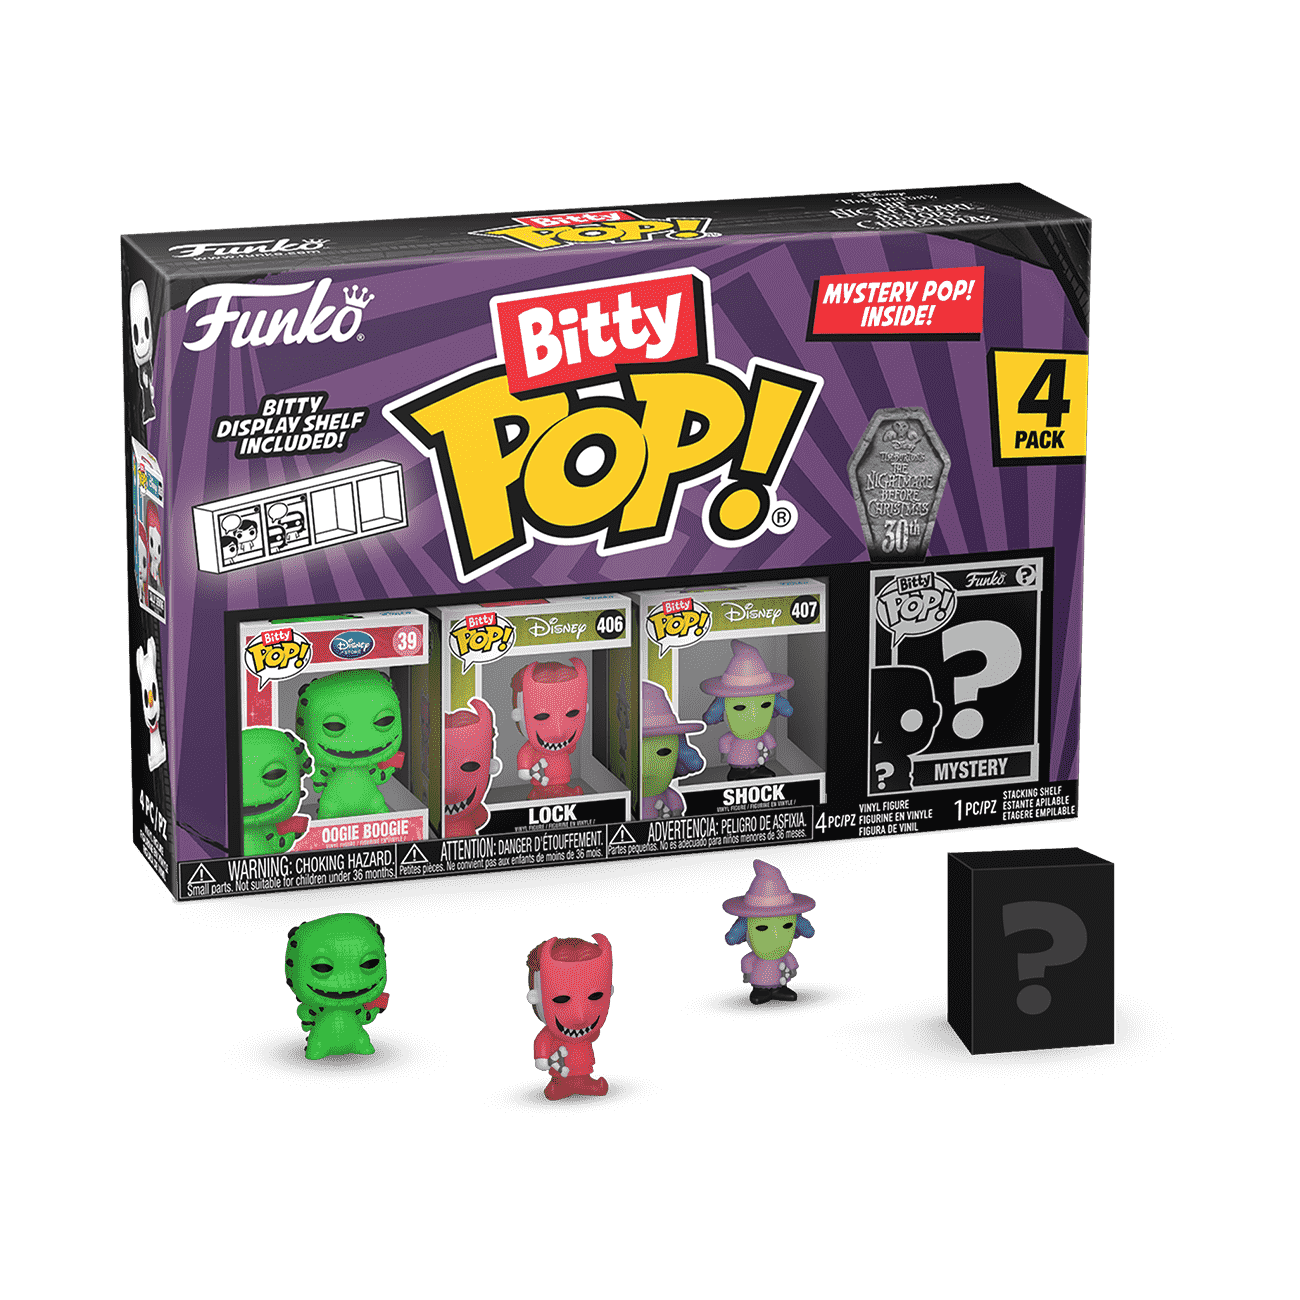 Buy Bitty Pop! The Nightmare Before Christmas 4-Pack Series 1 at Funko.